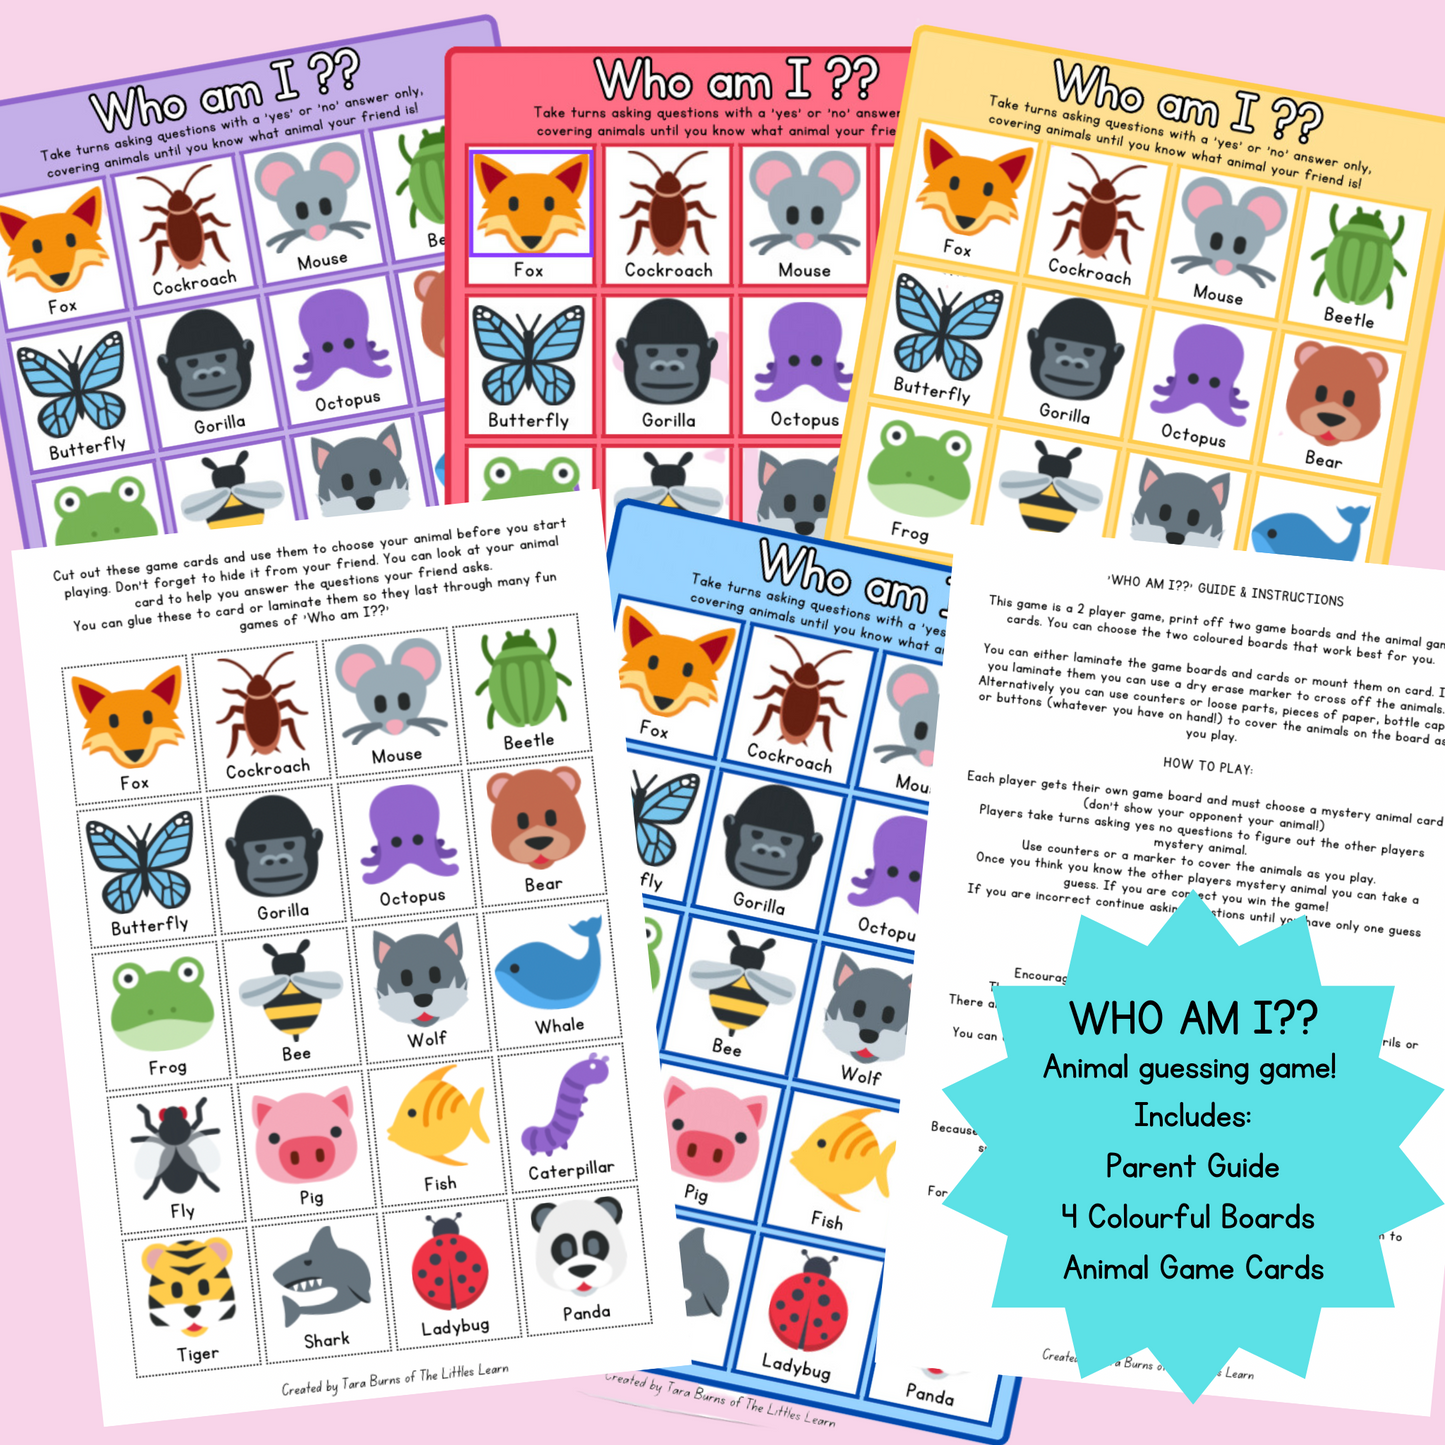 Colourful animal boards featuring 24 cute animal faces for a fun print at home version of the classic guess who game.